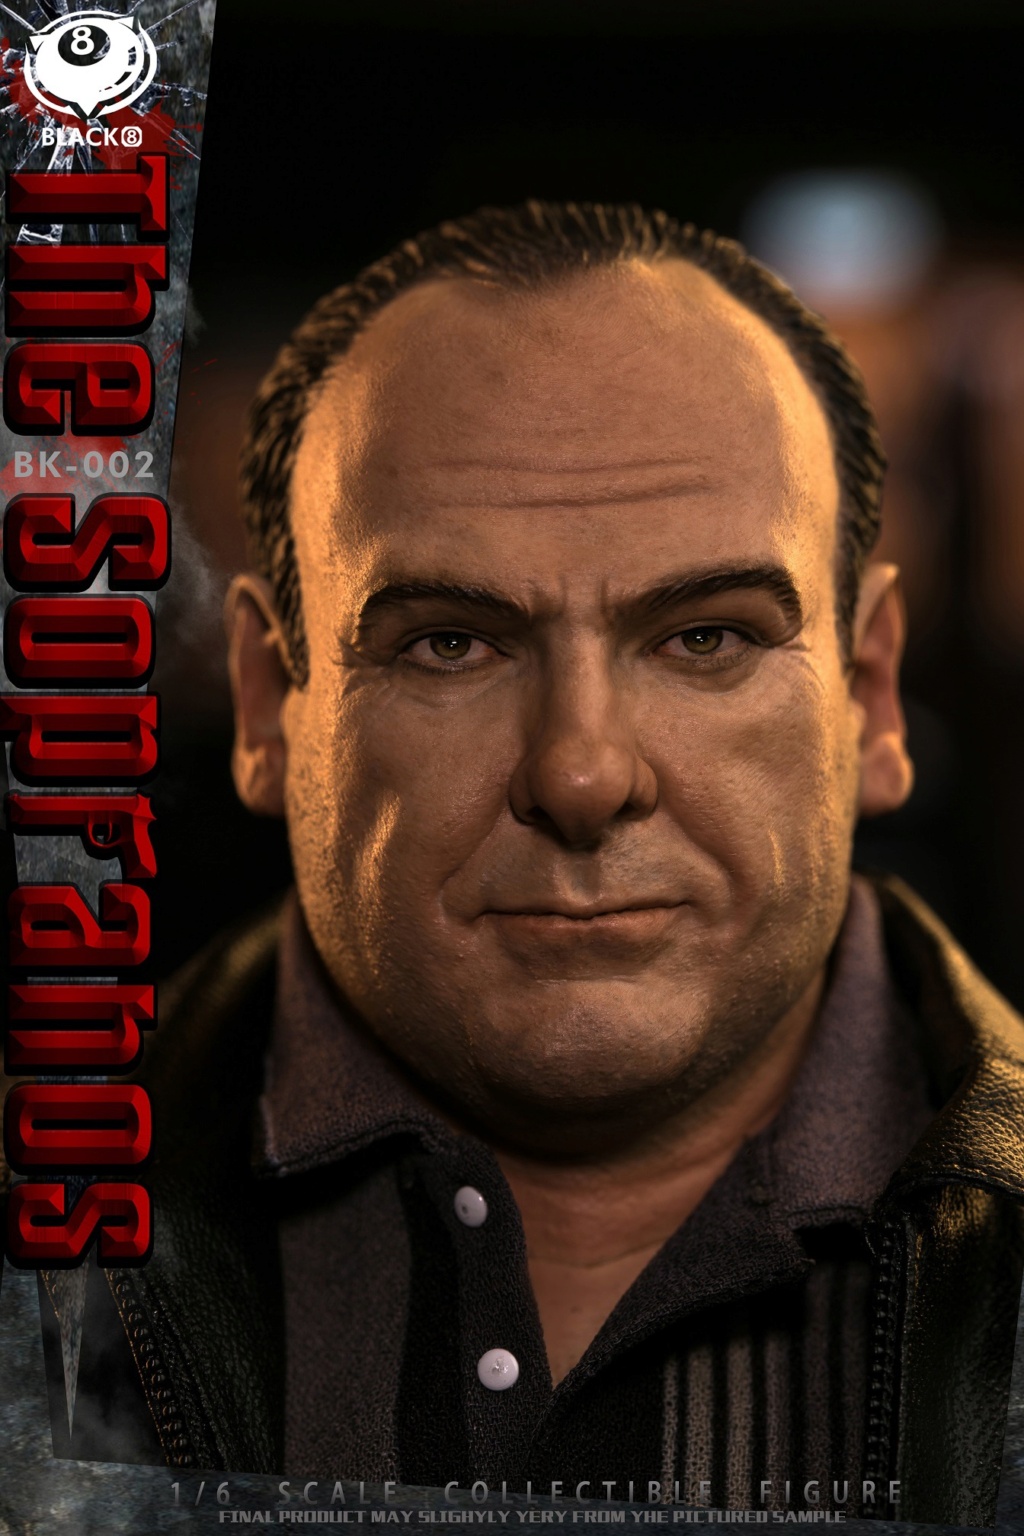 NEW PRODUCT: BLACK 8 STUDIO: 1/6 "The Sopranos" Collection Doll#BK-002 16110912